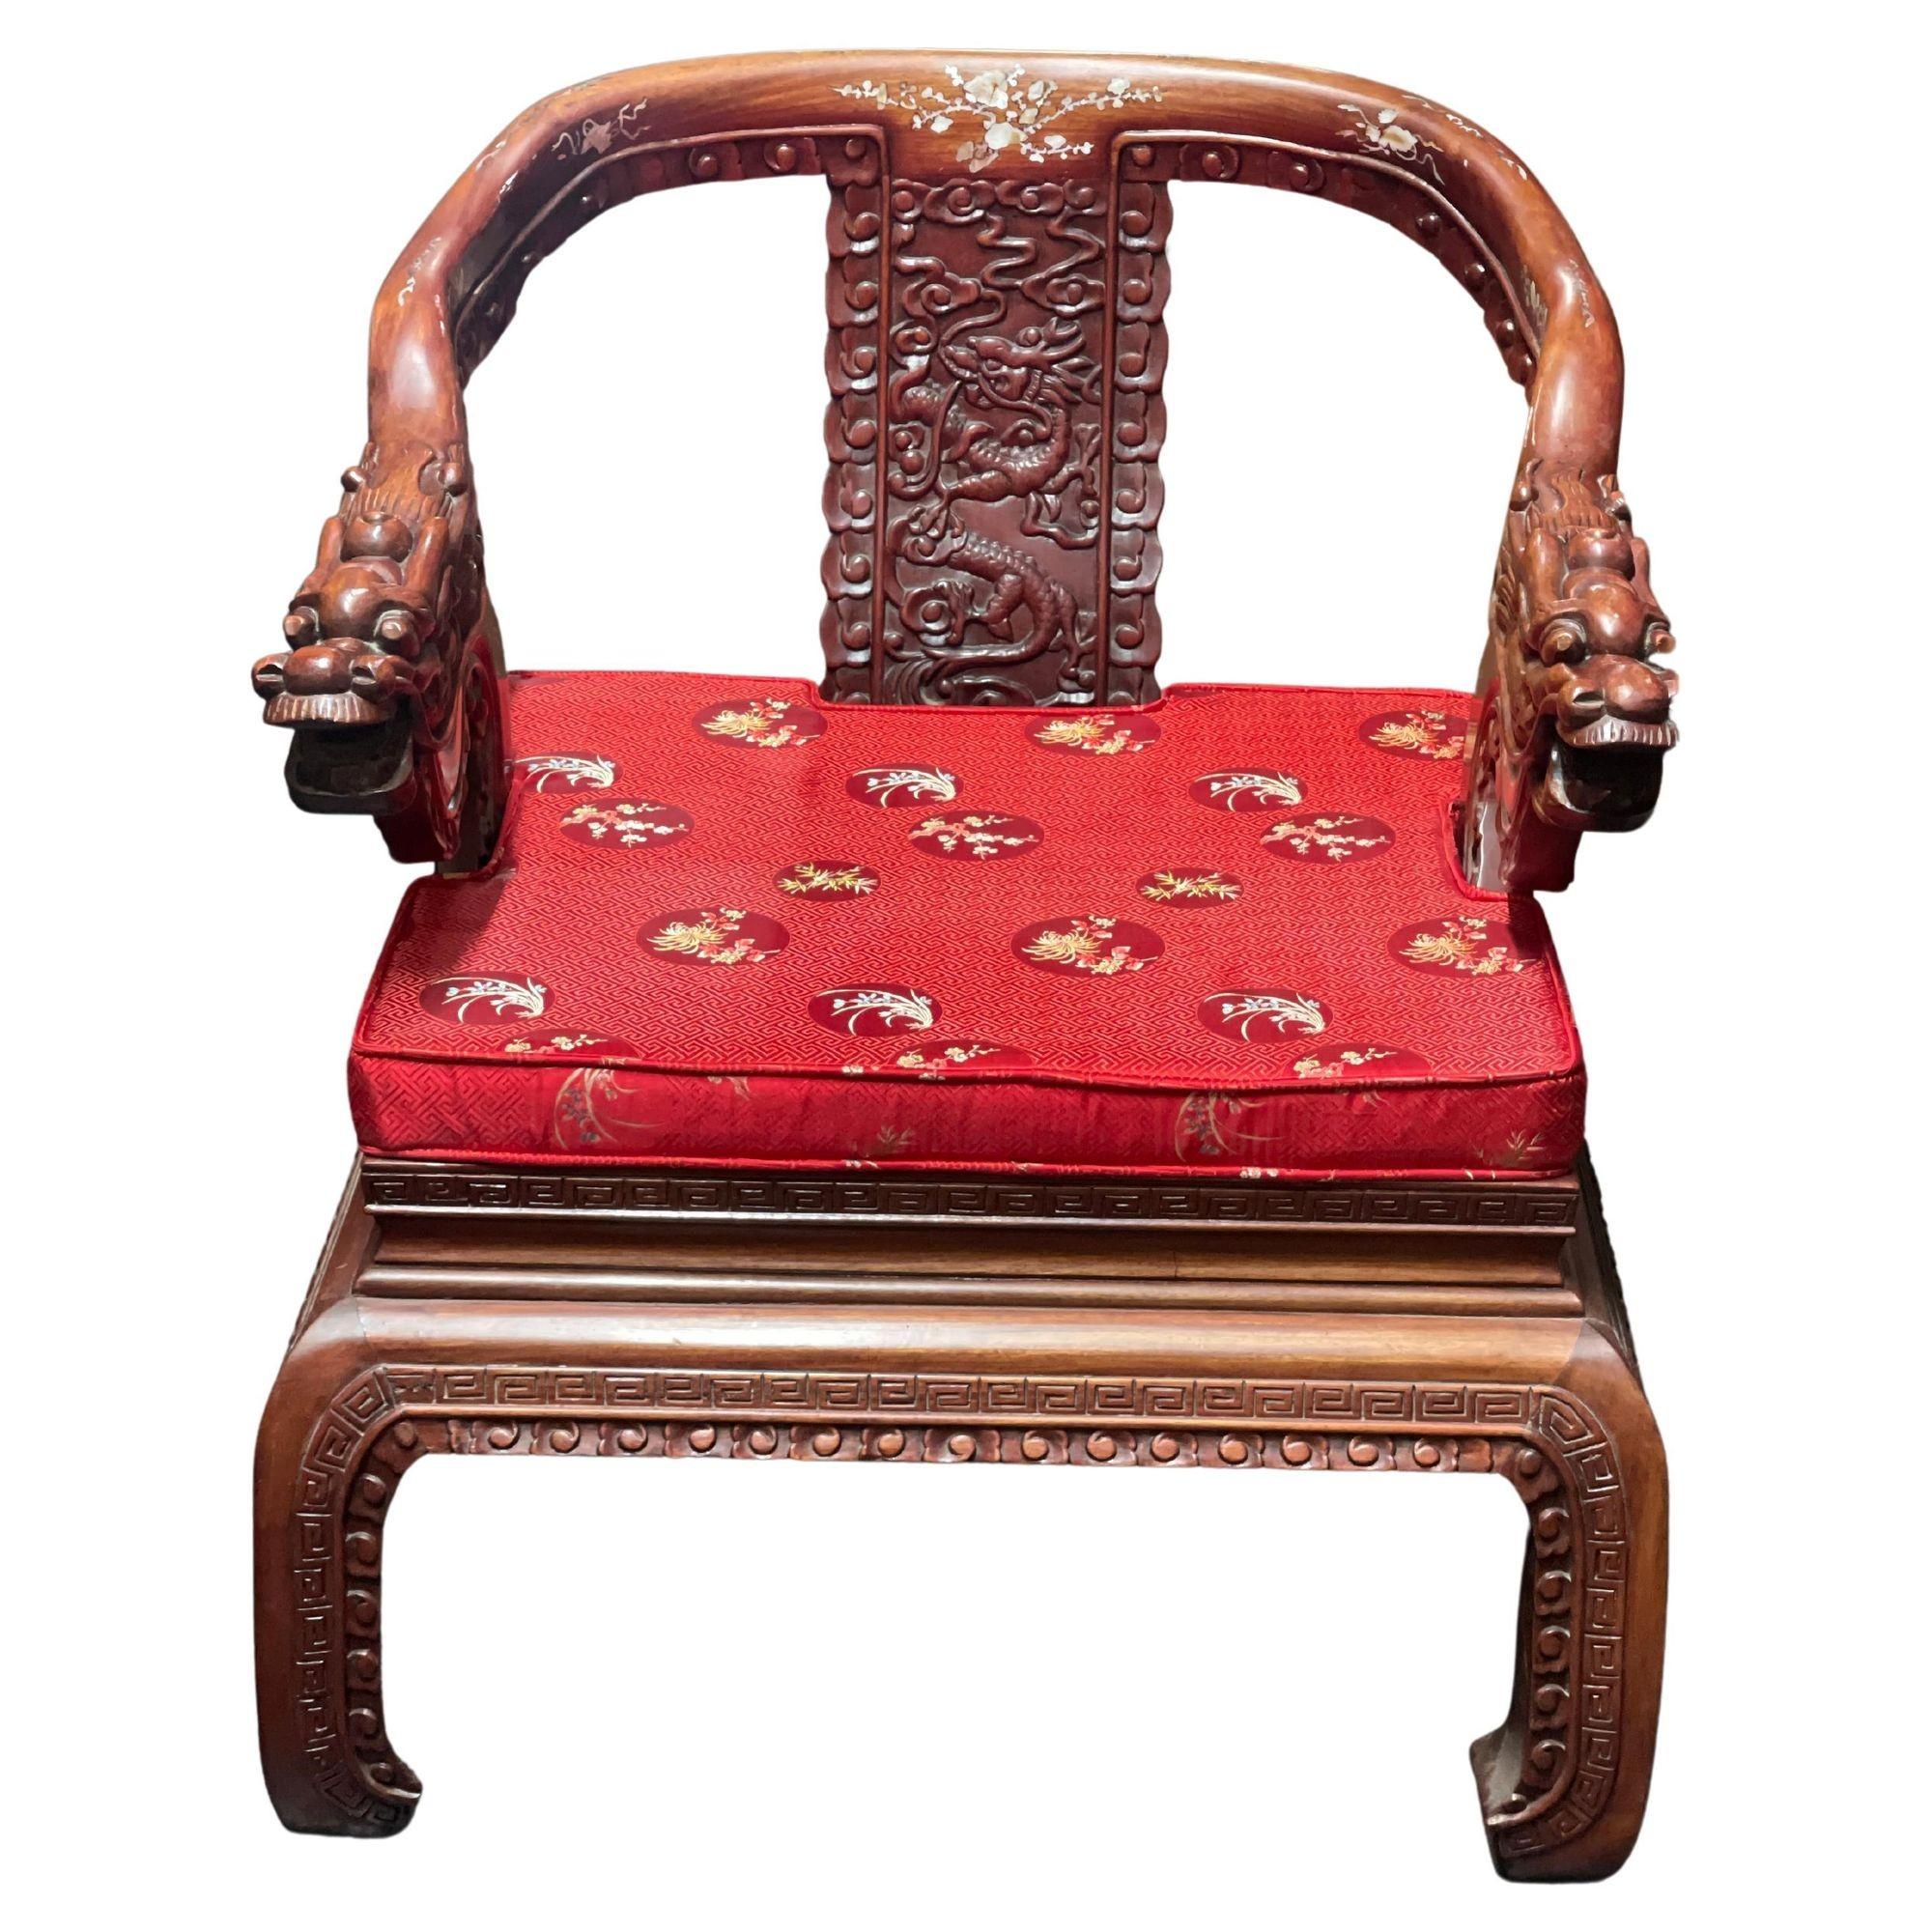 Set of four Chinese carved wood arm chairs depicting dragon figures all around, mother of pearl inlay and red satin cushions with floral patterns. (circa 1950s)
Dimensions:
30